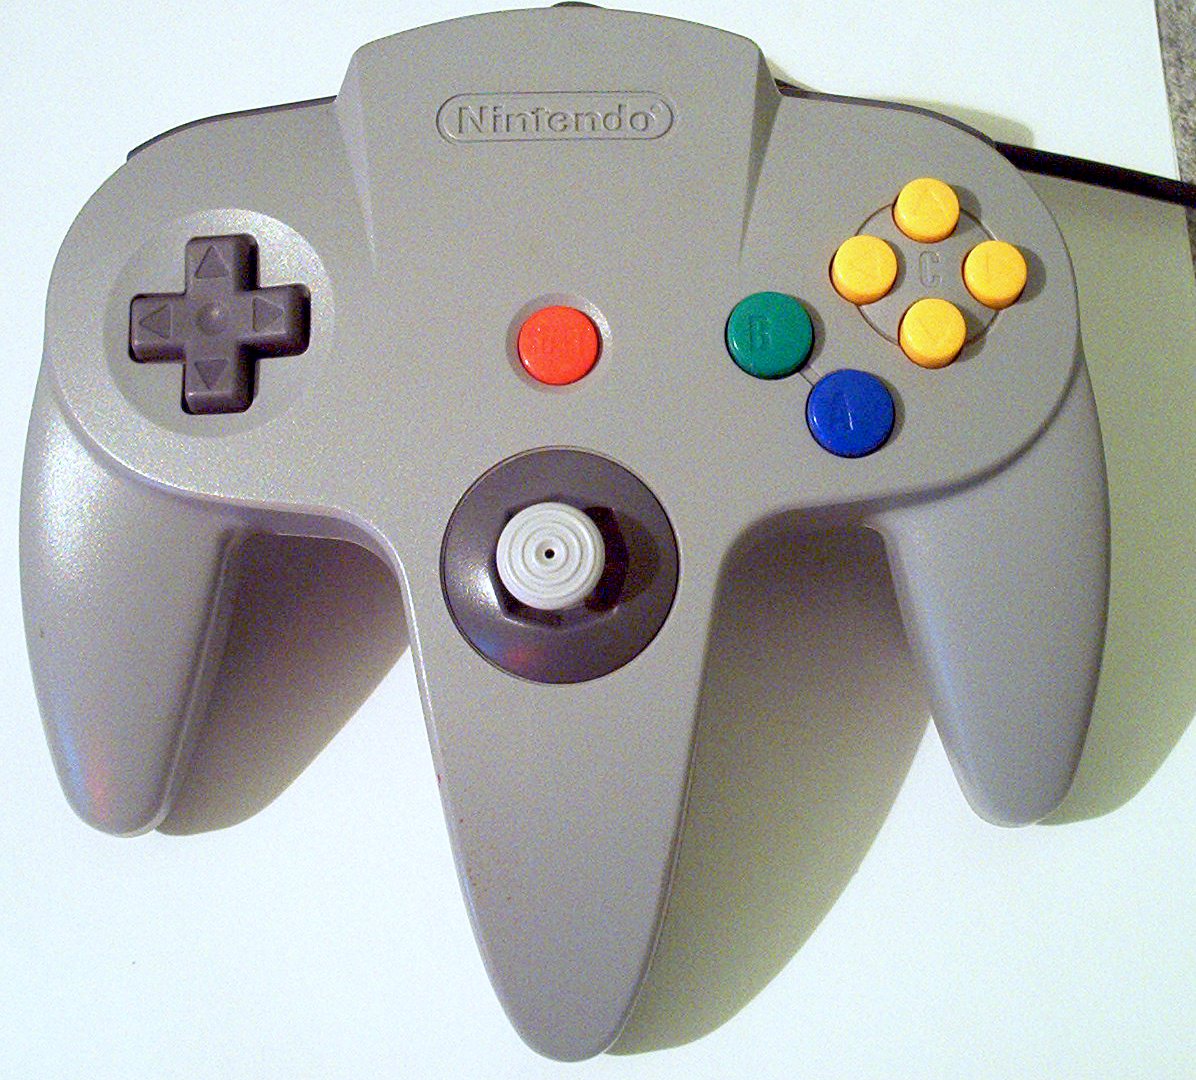 n64 controller layout